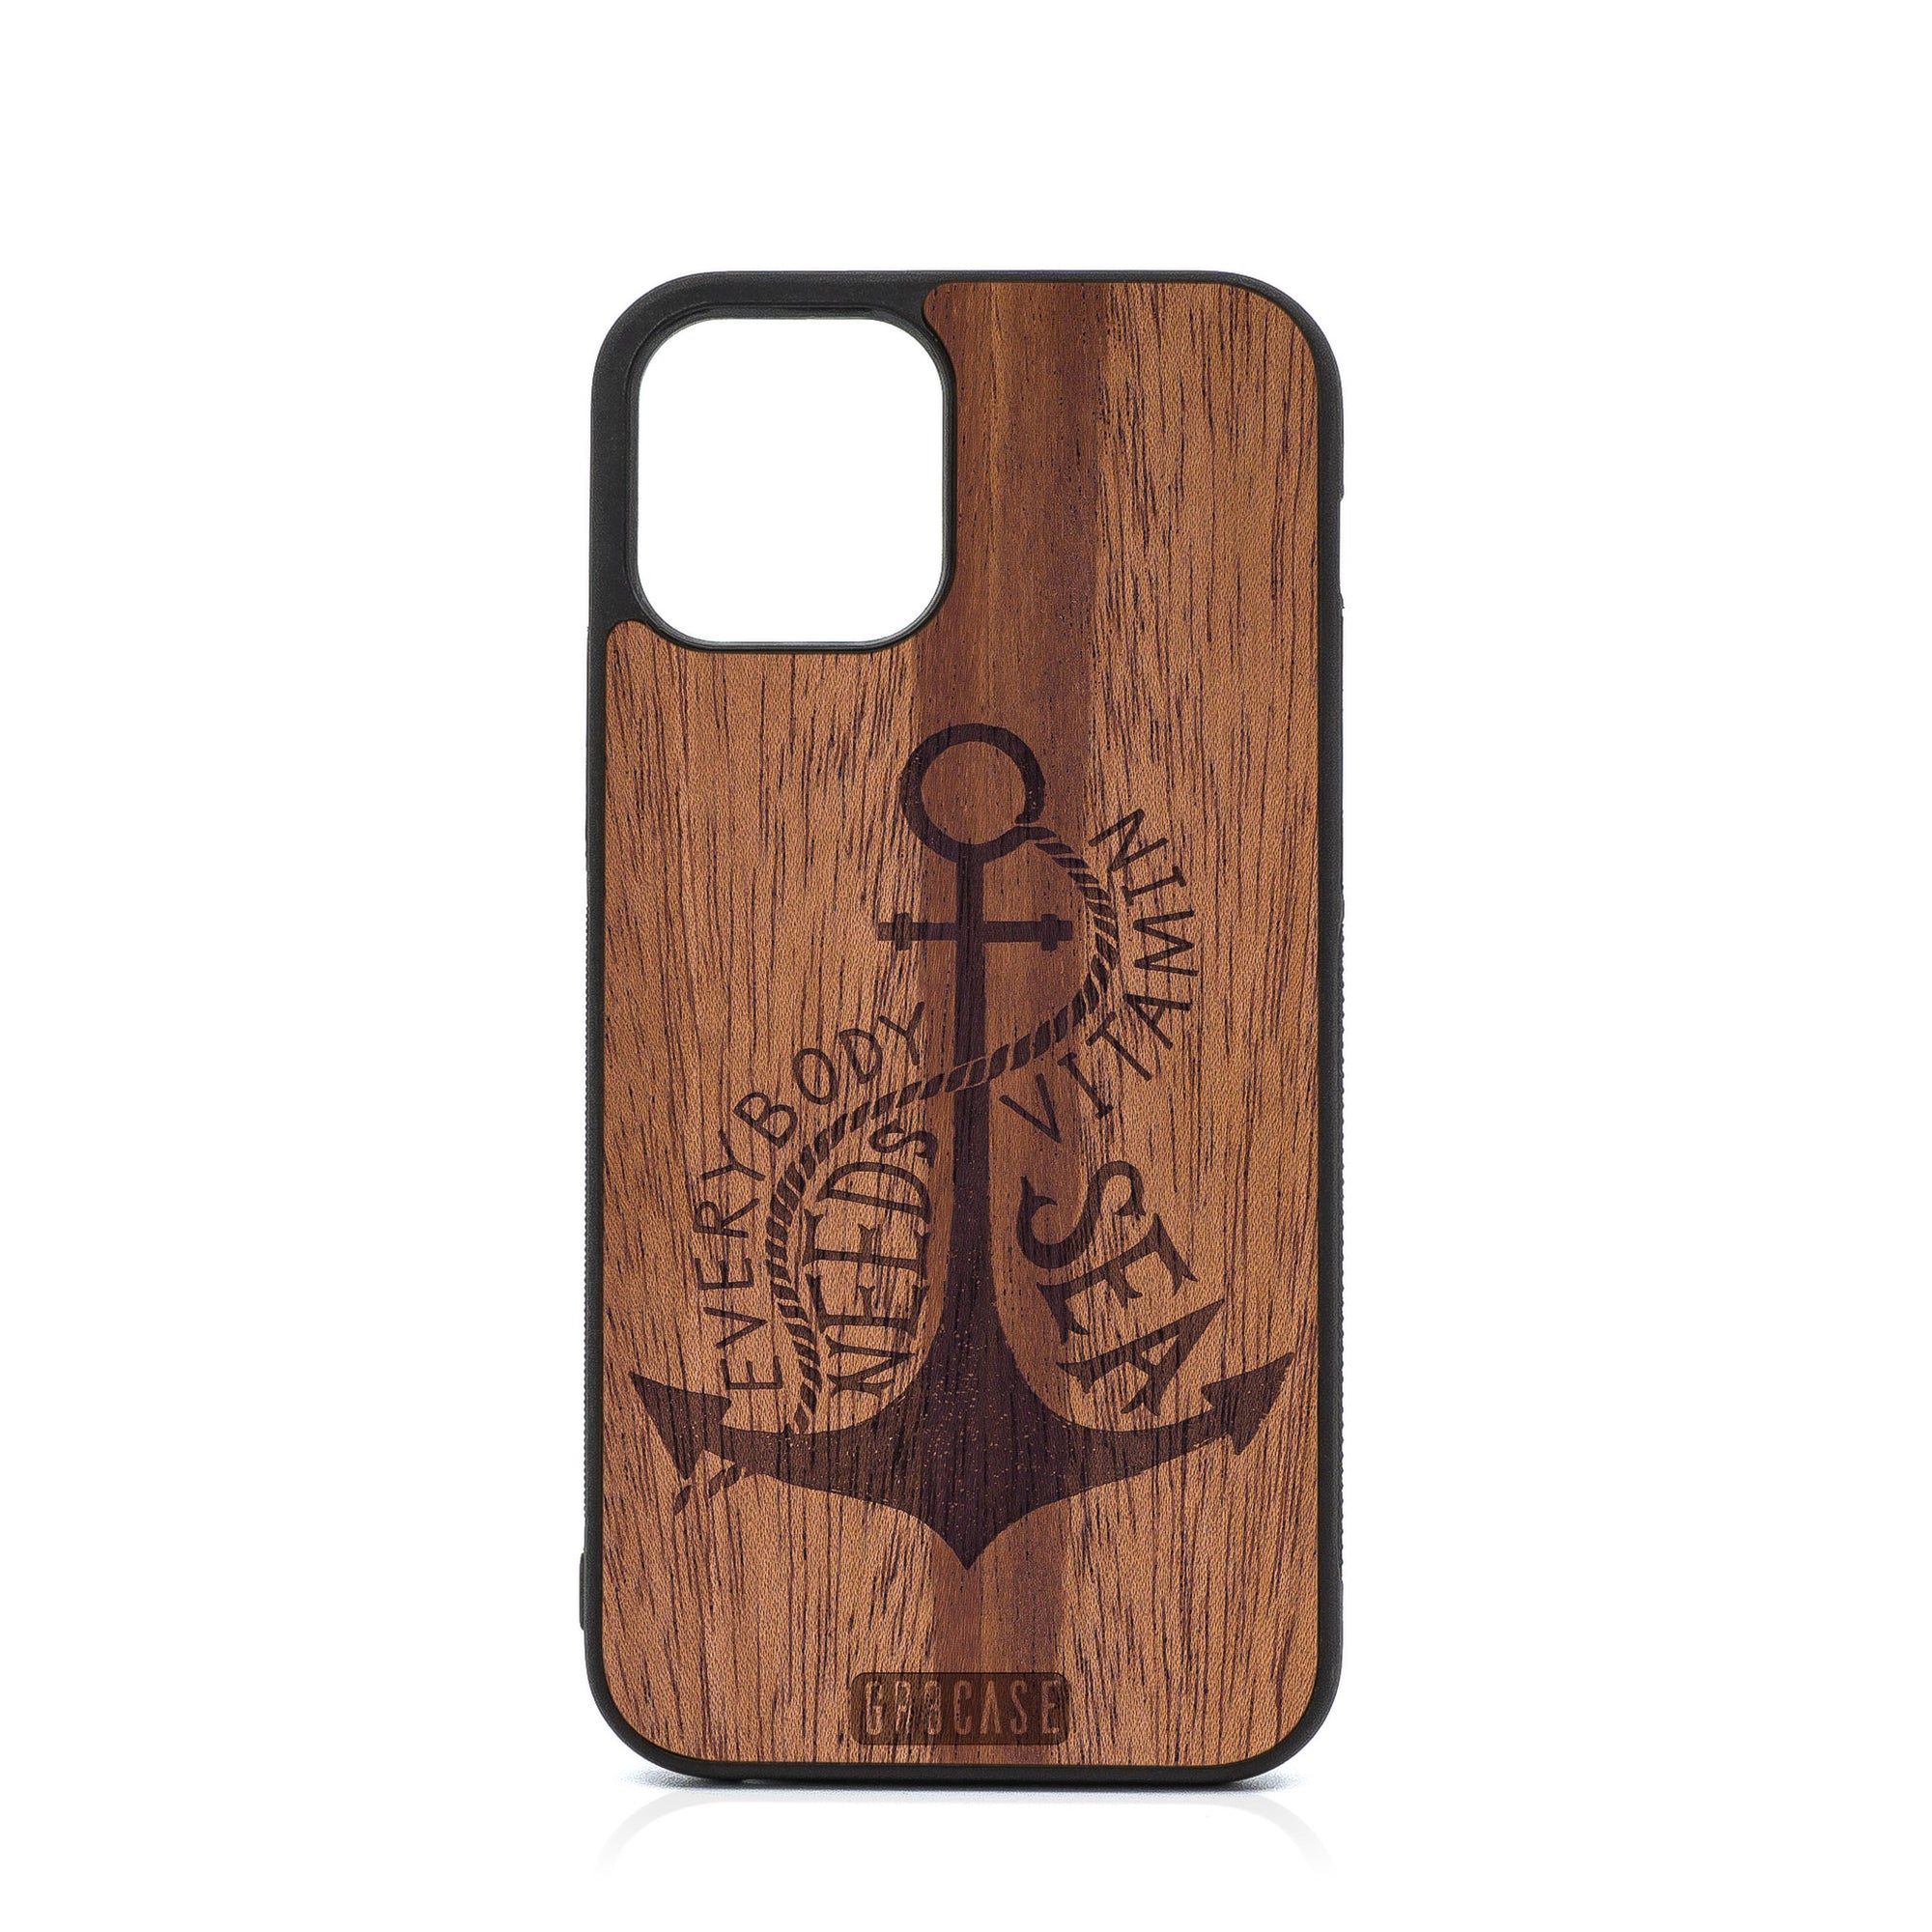 Everybody Needs Vitamin Sea (Anchor) Design Wood Case For iPhone 12